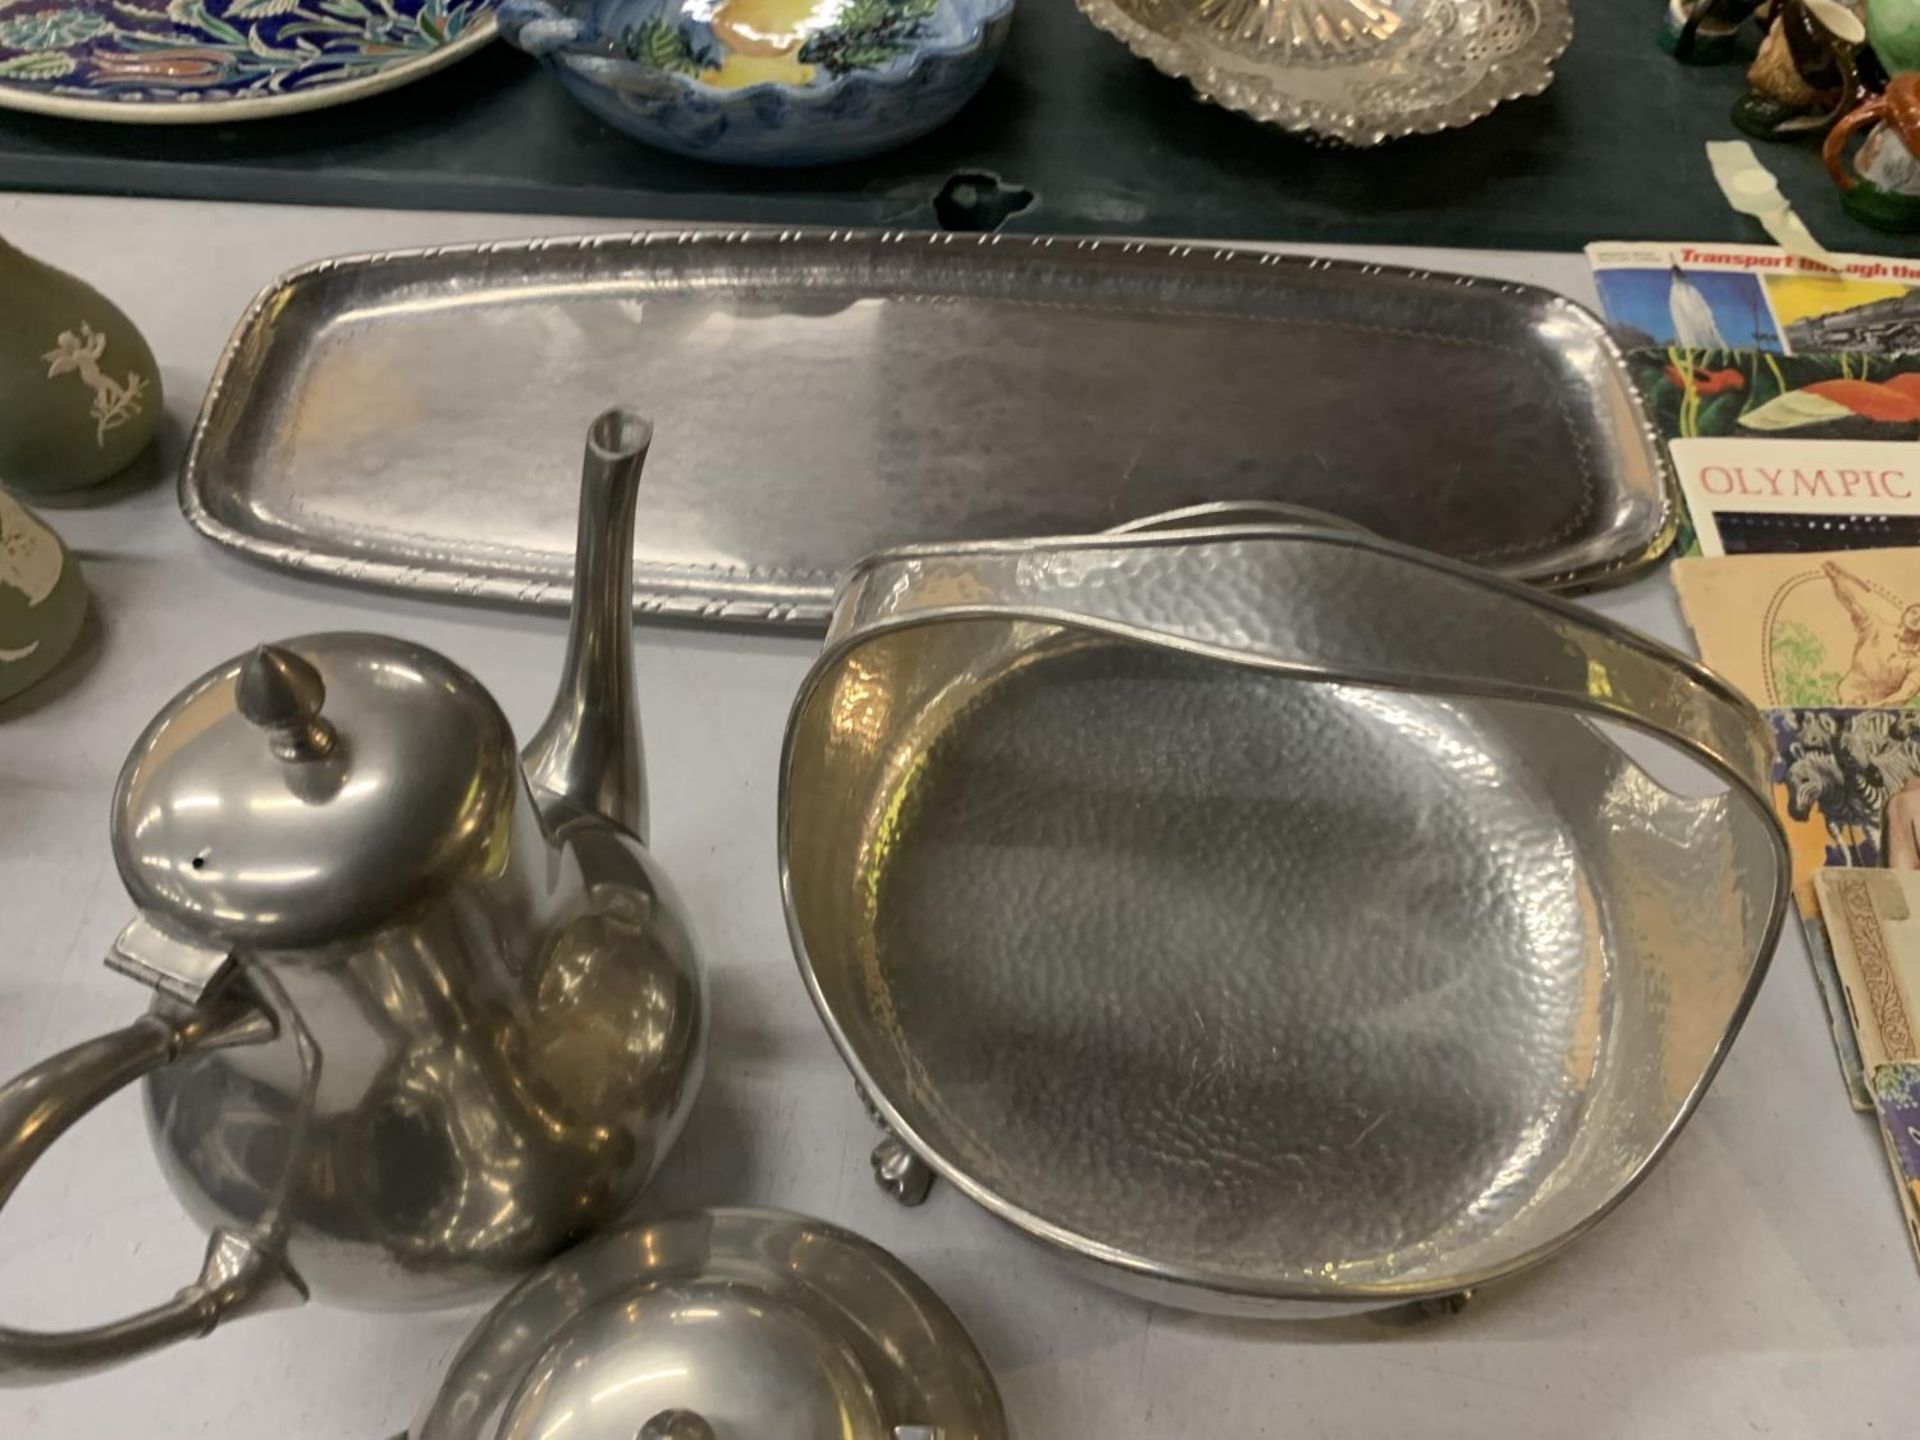 A PEWTER TEASET TO INCLUDE A TEAPOT, HOT WATER POT, CREAM JUG, SUGAR BOWL, A TRAY, LIDDED BASKET - Image 3 of 3